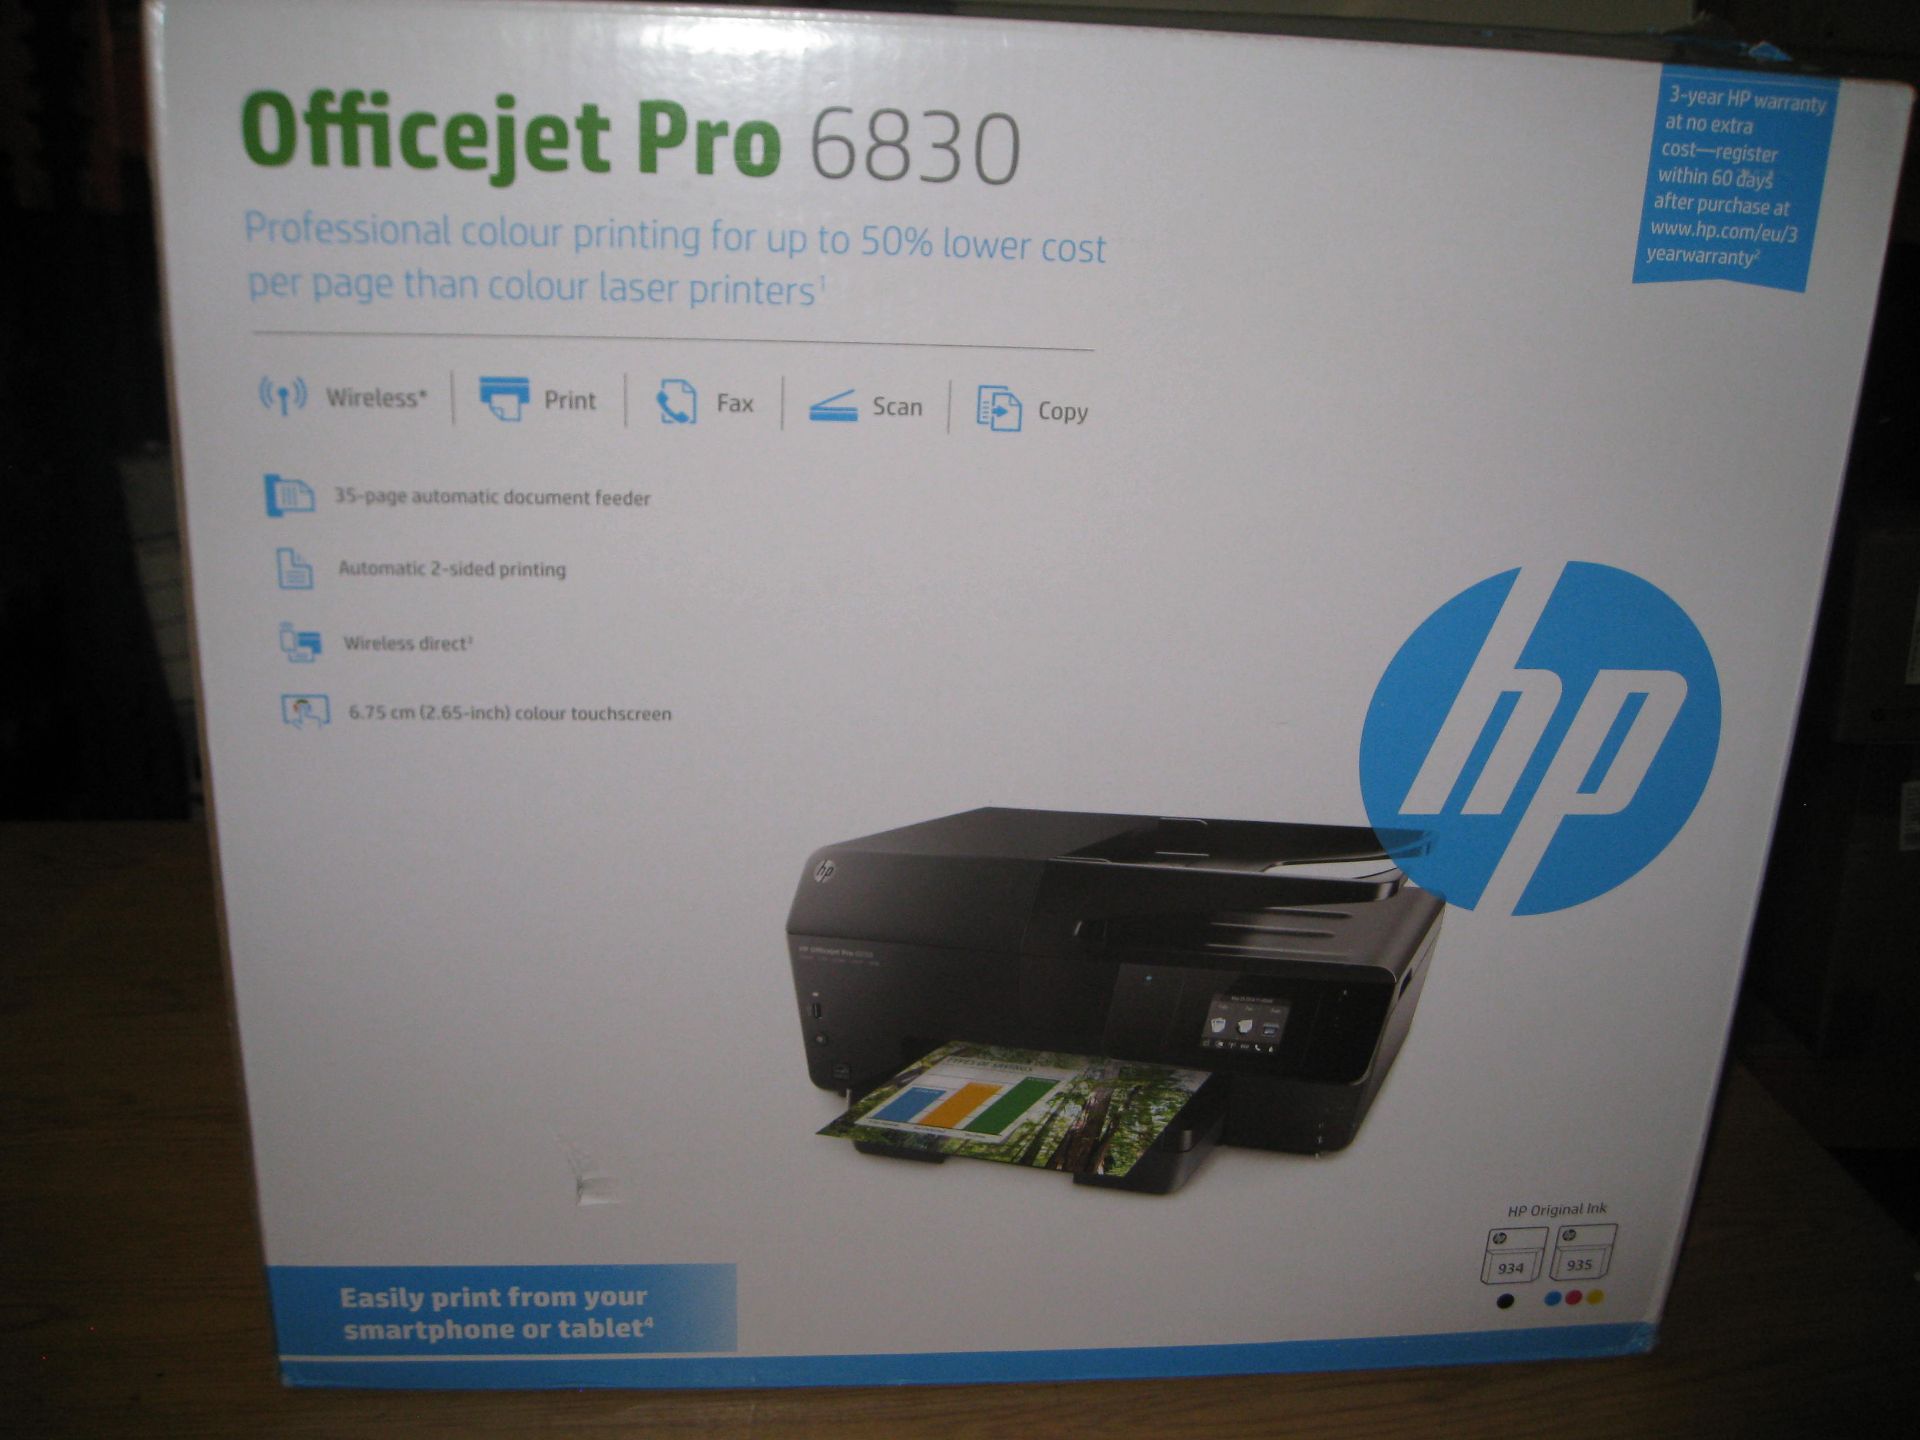 HP OFFICEJET PRO e-ALL IN ONE COLOUR PRINTER / WIRELESS / FAX / SCAN / COPY. NEW & BOXED